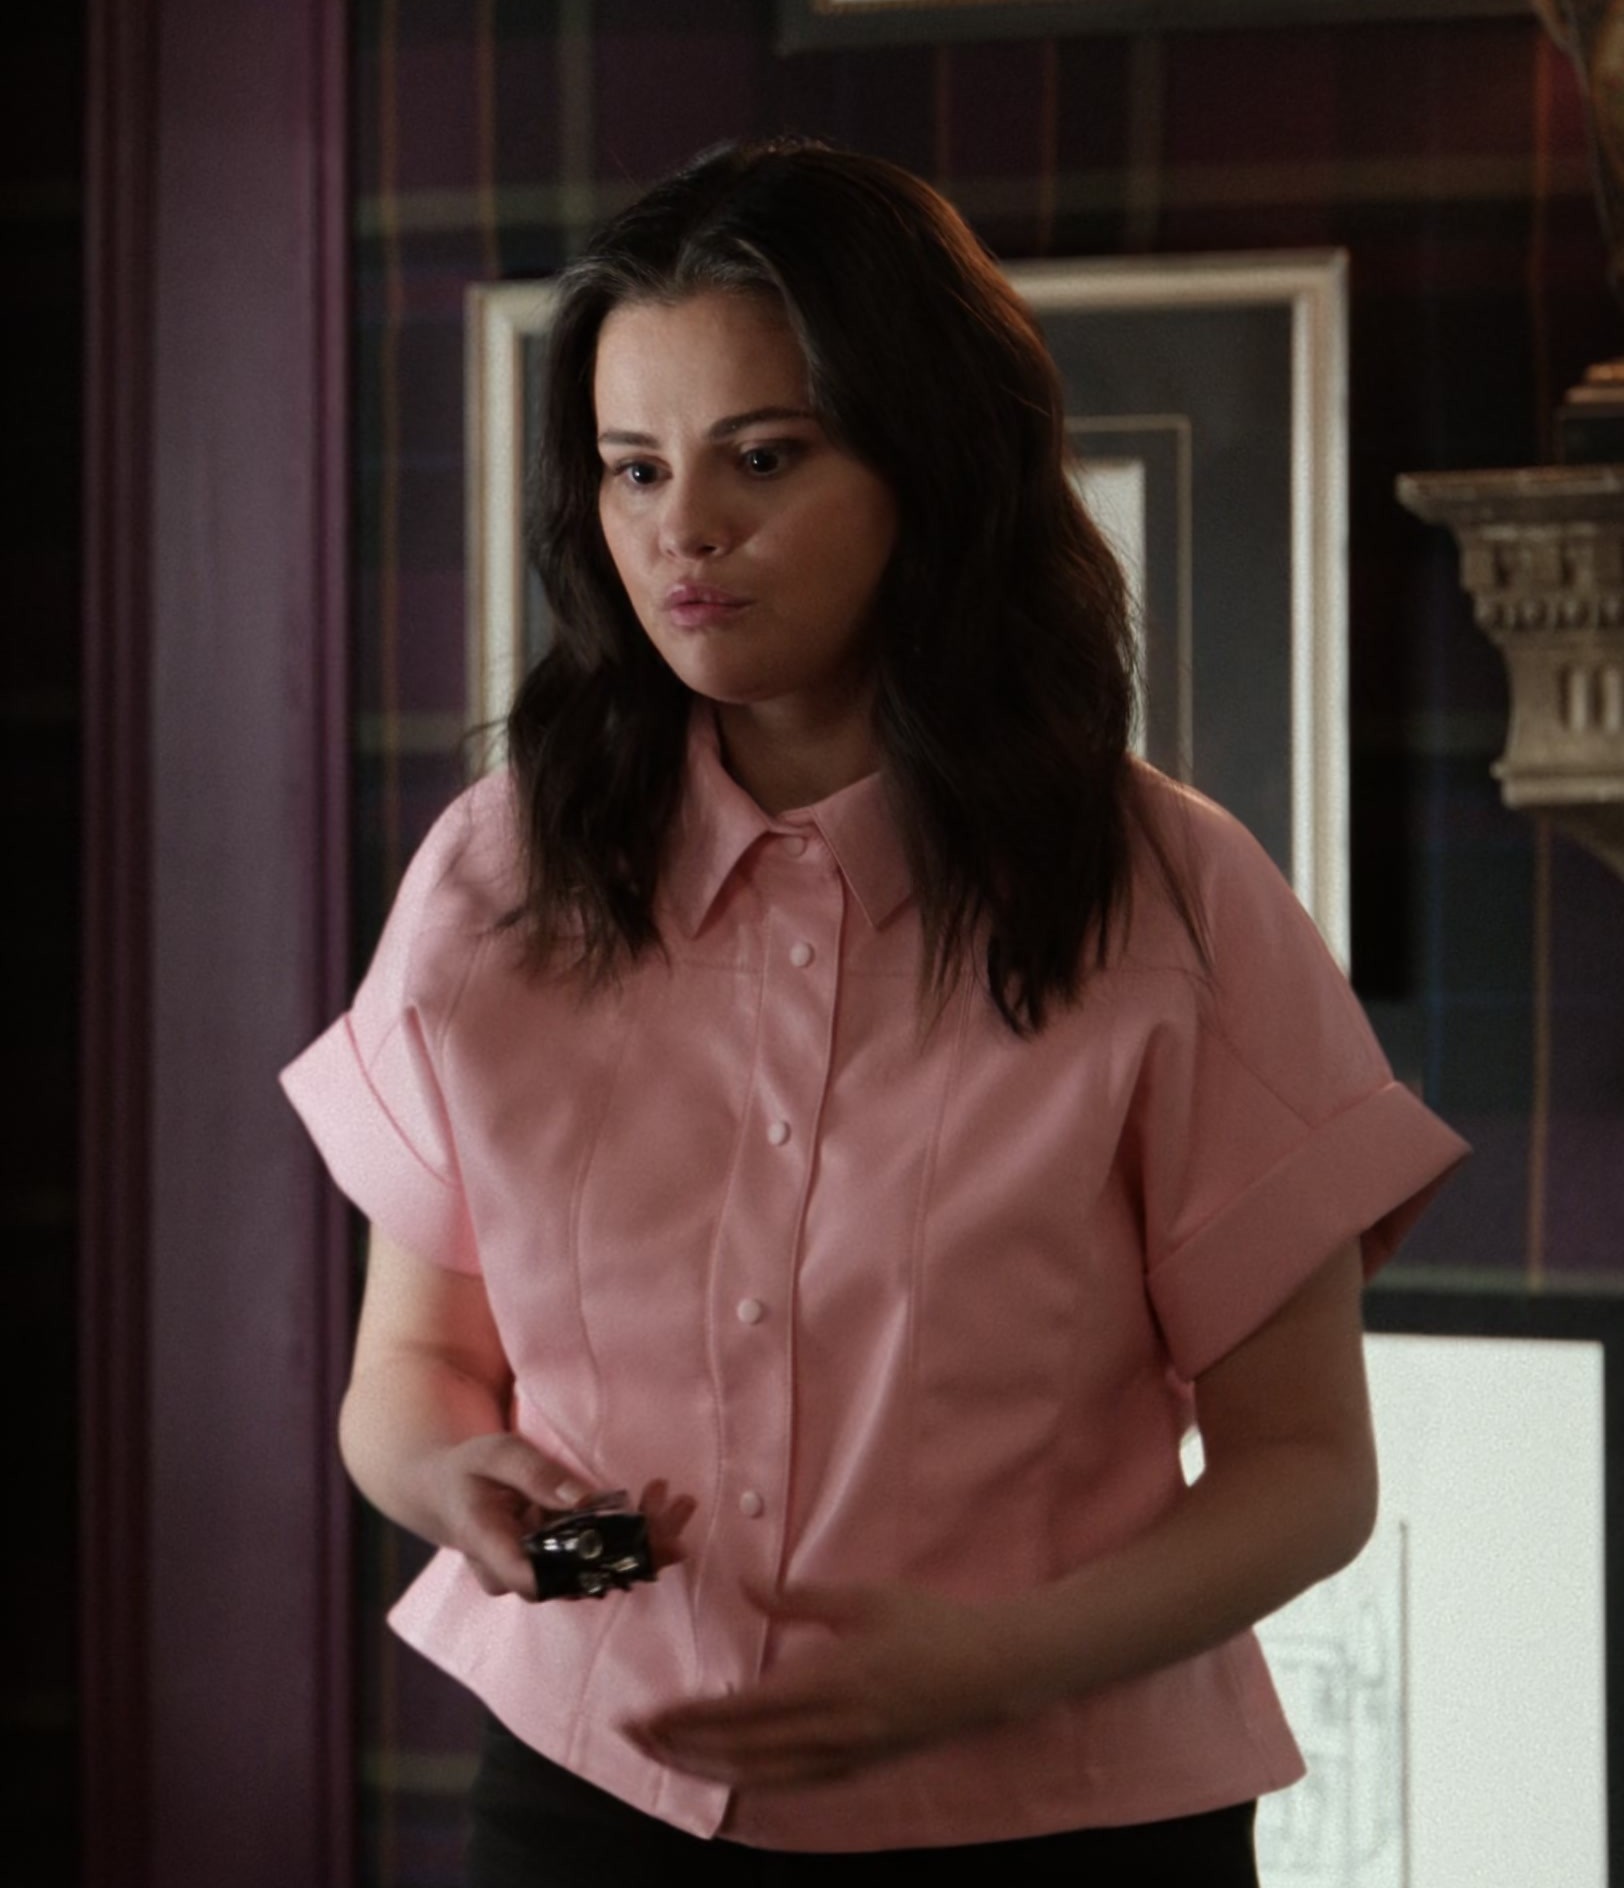 Worn on Only Murders in the Building TV Show - Pink Shirt Worn by Selena Gomez as Mabel Mora